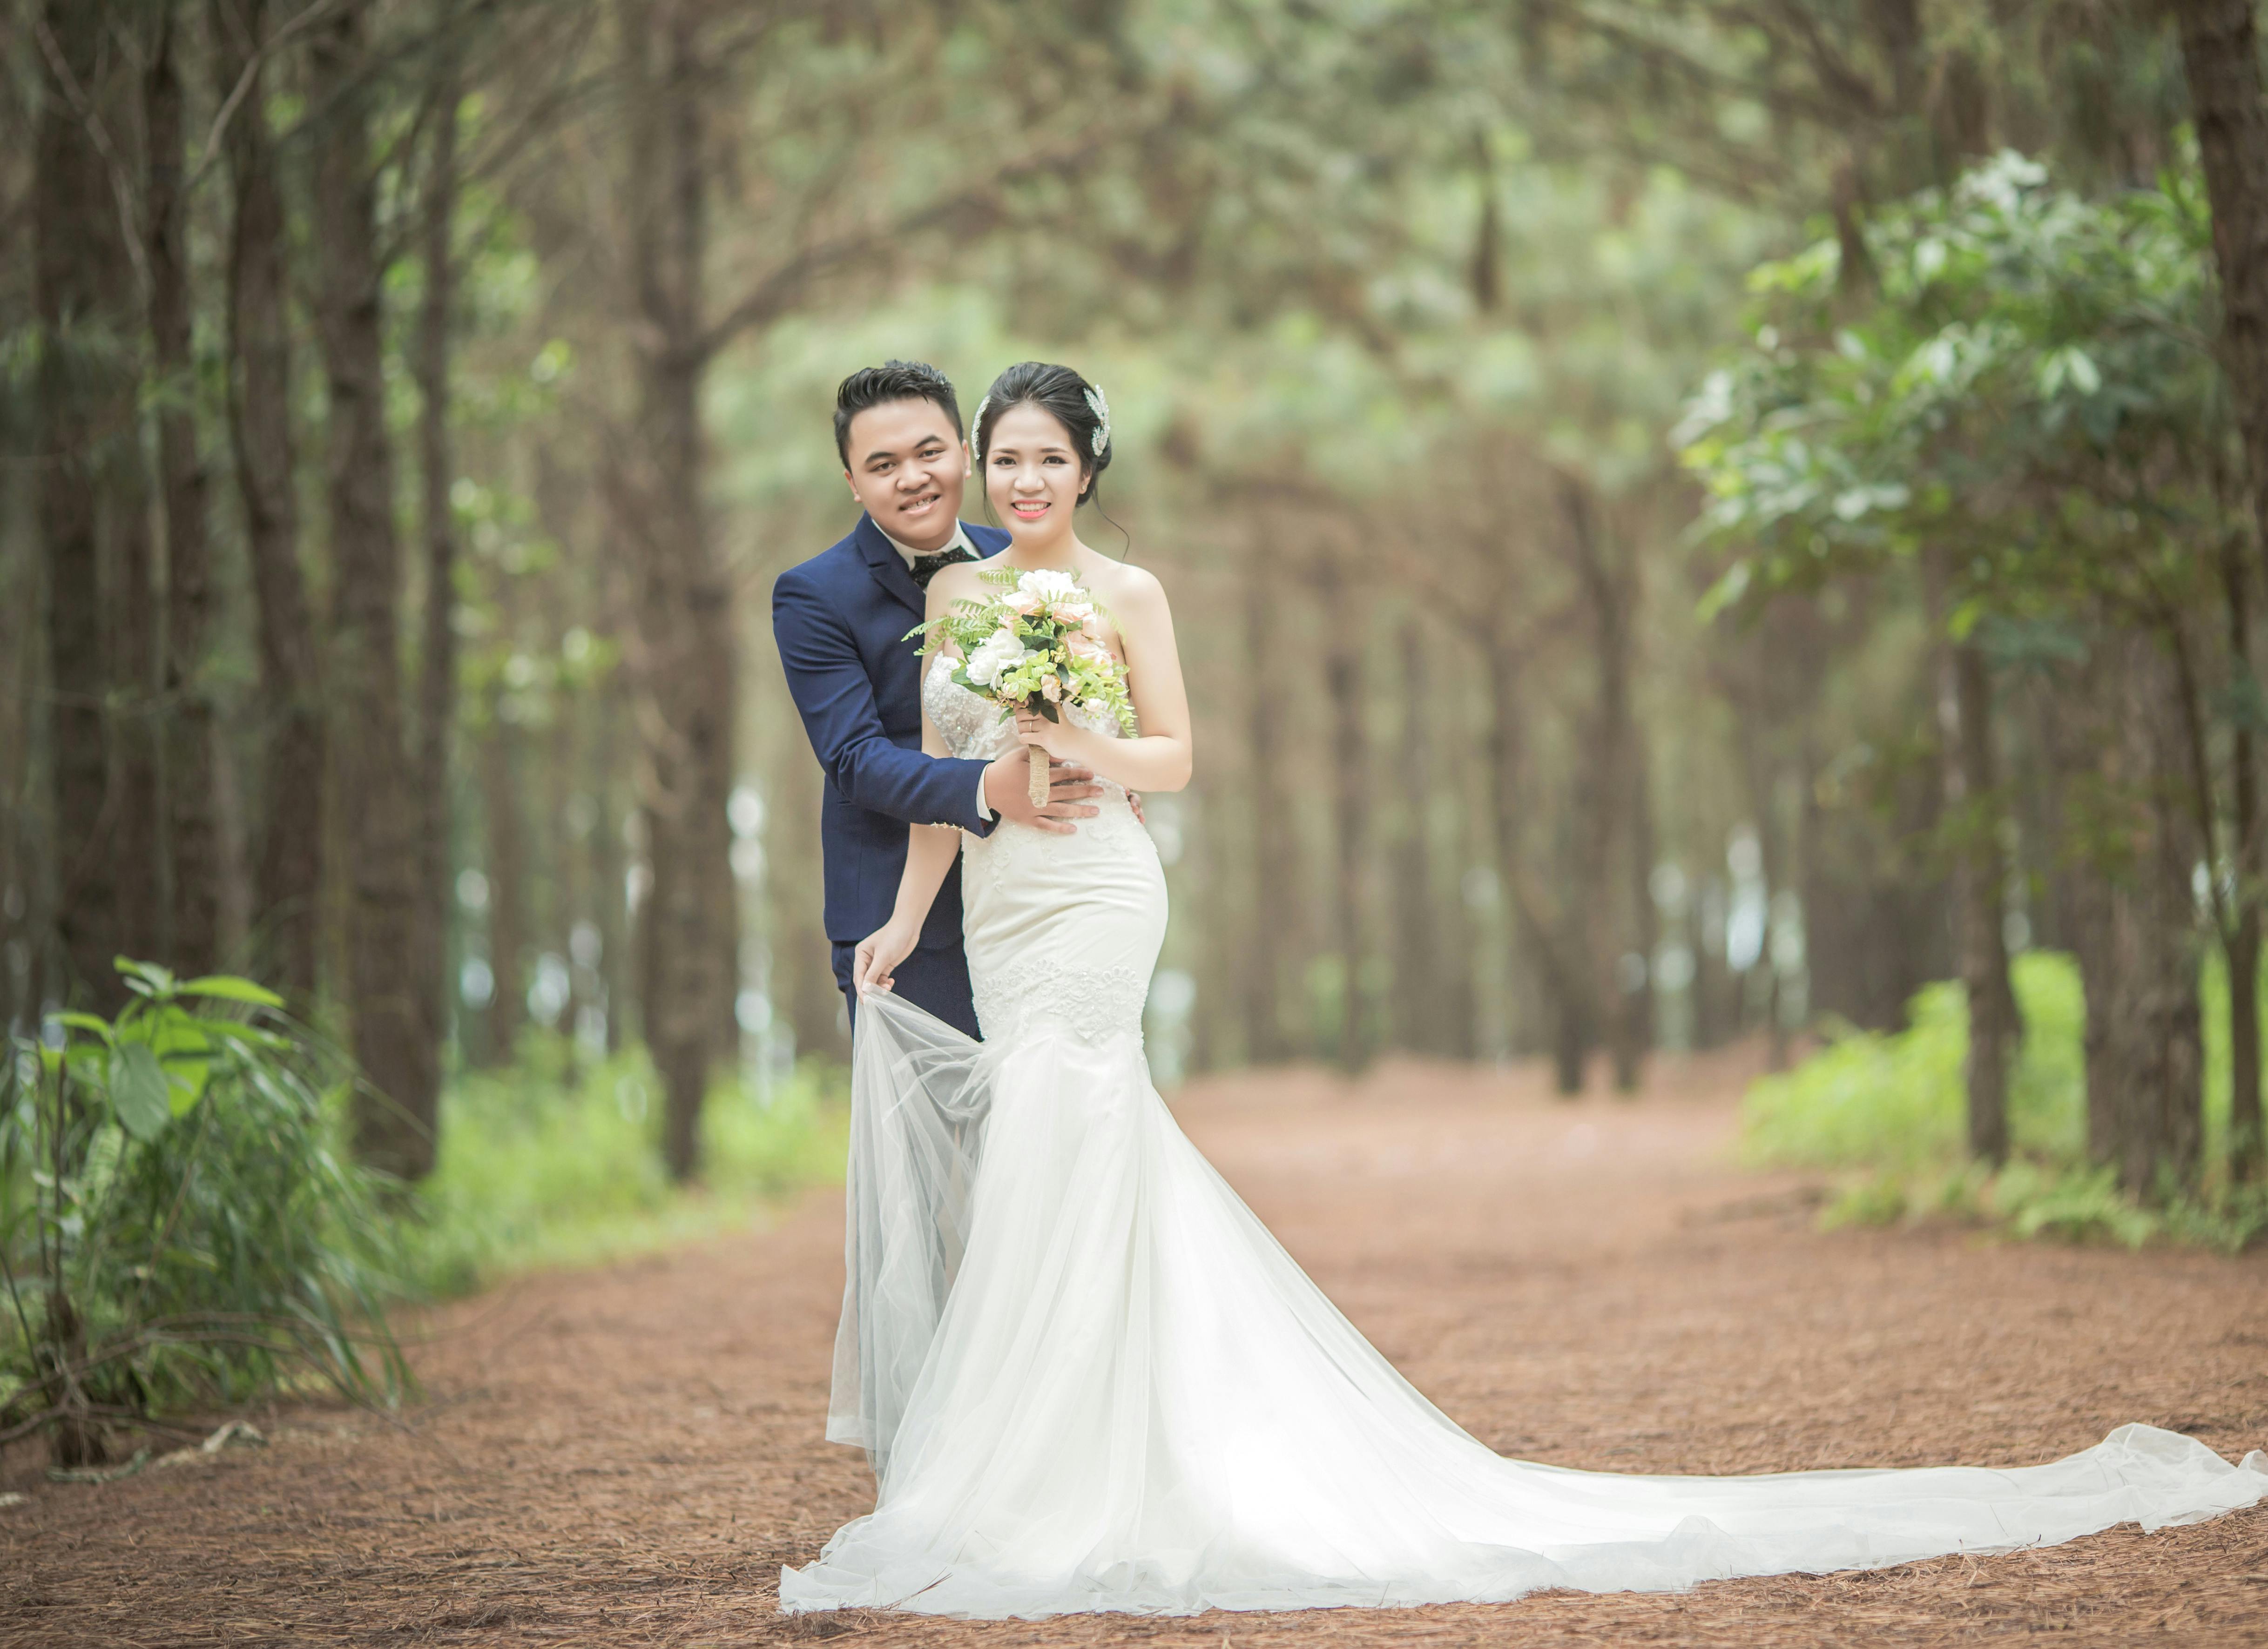 ENAGAGEMENT DAY | Pre wedding photoshoot outfit, Couple wedding dress,  Photoshoot outfits